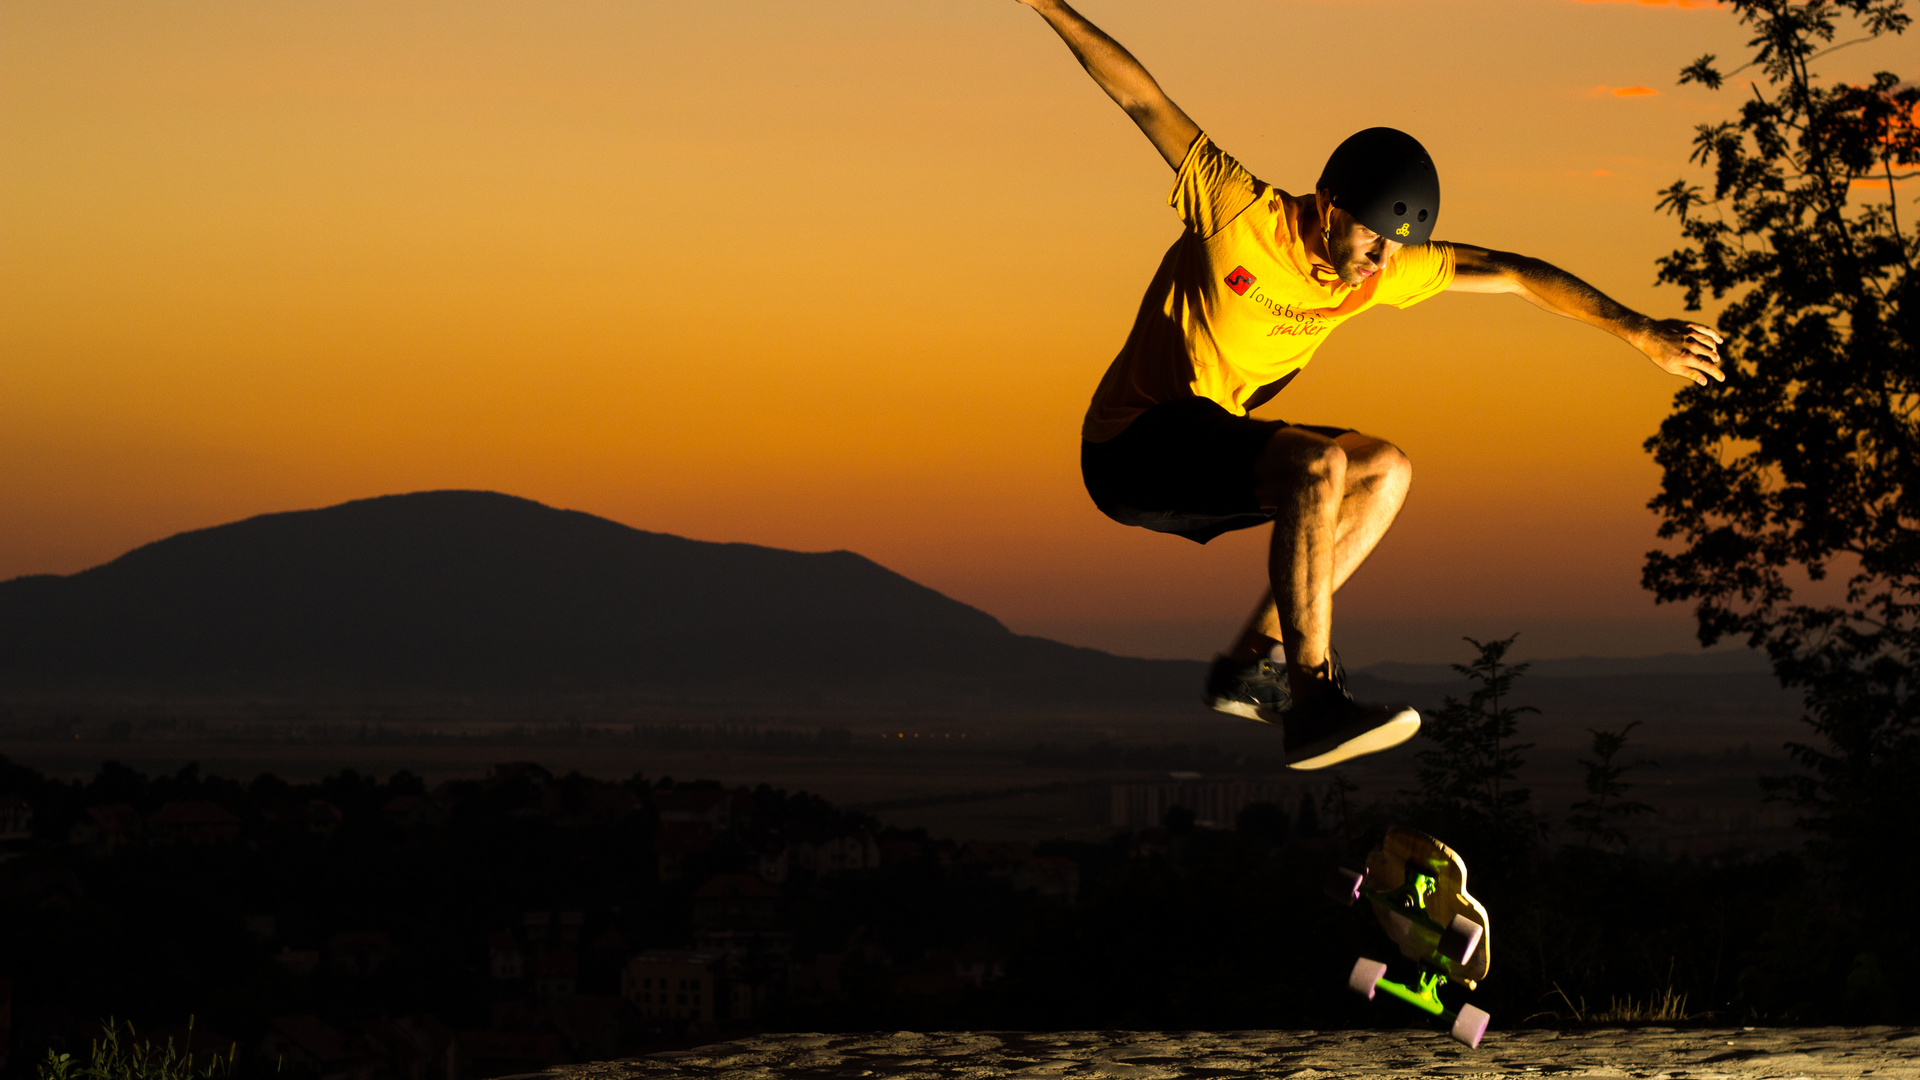 Free download Related Wallpaper for Awesome Skateboard Wallpaper Photo 011 [1920x1080] for your Desktop, Mobile & Tablet. Explore Awesome Skateboard Wallpaper. Skateboard Wallpaper, Skateboarding Wallpaper HD, Cool Skateboard Wallpaper